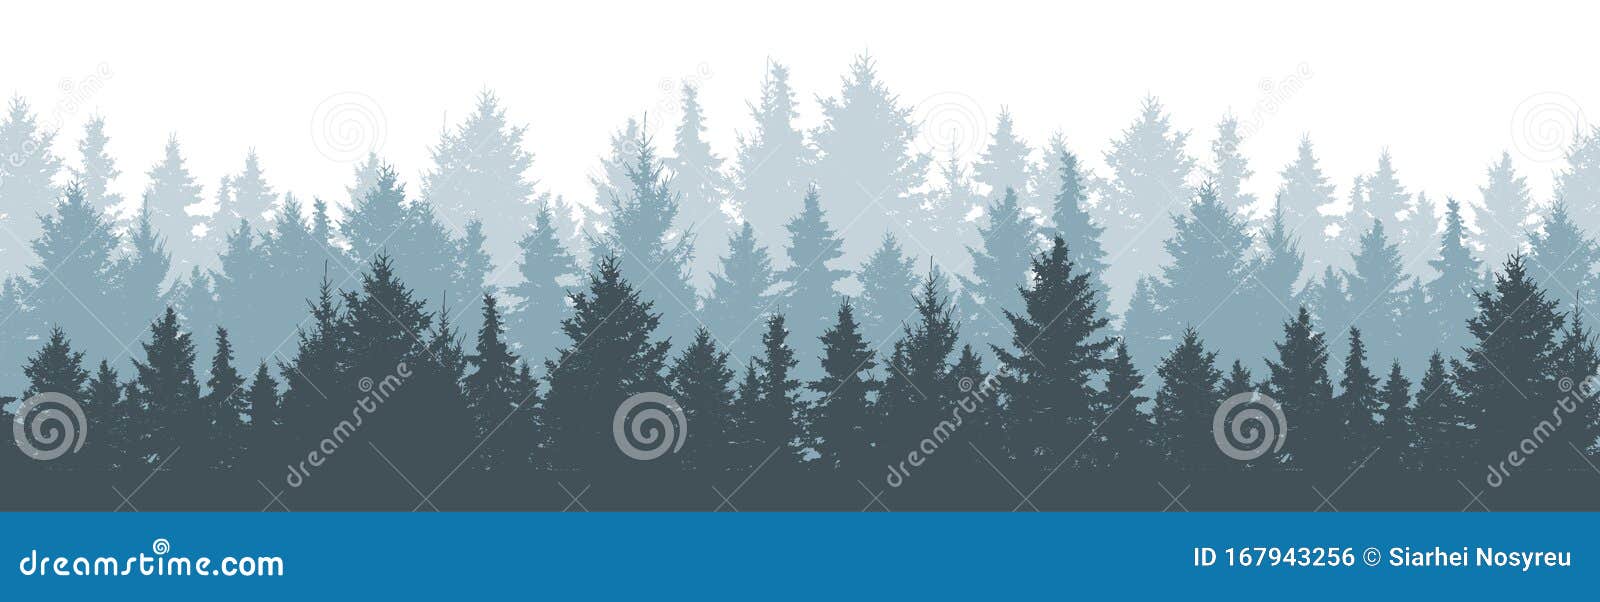 coniferous winter forest background. nature, landscape. pine, spruce, christmas tree. fog evergreen coniferous trees. silhouette